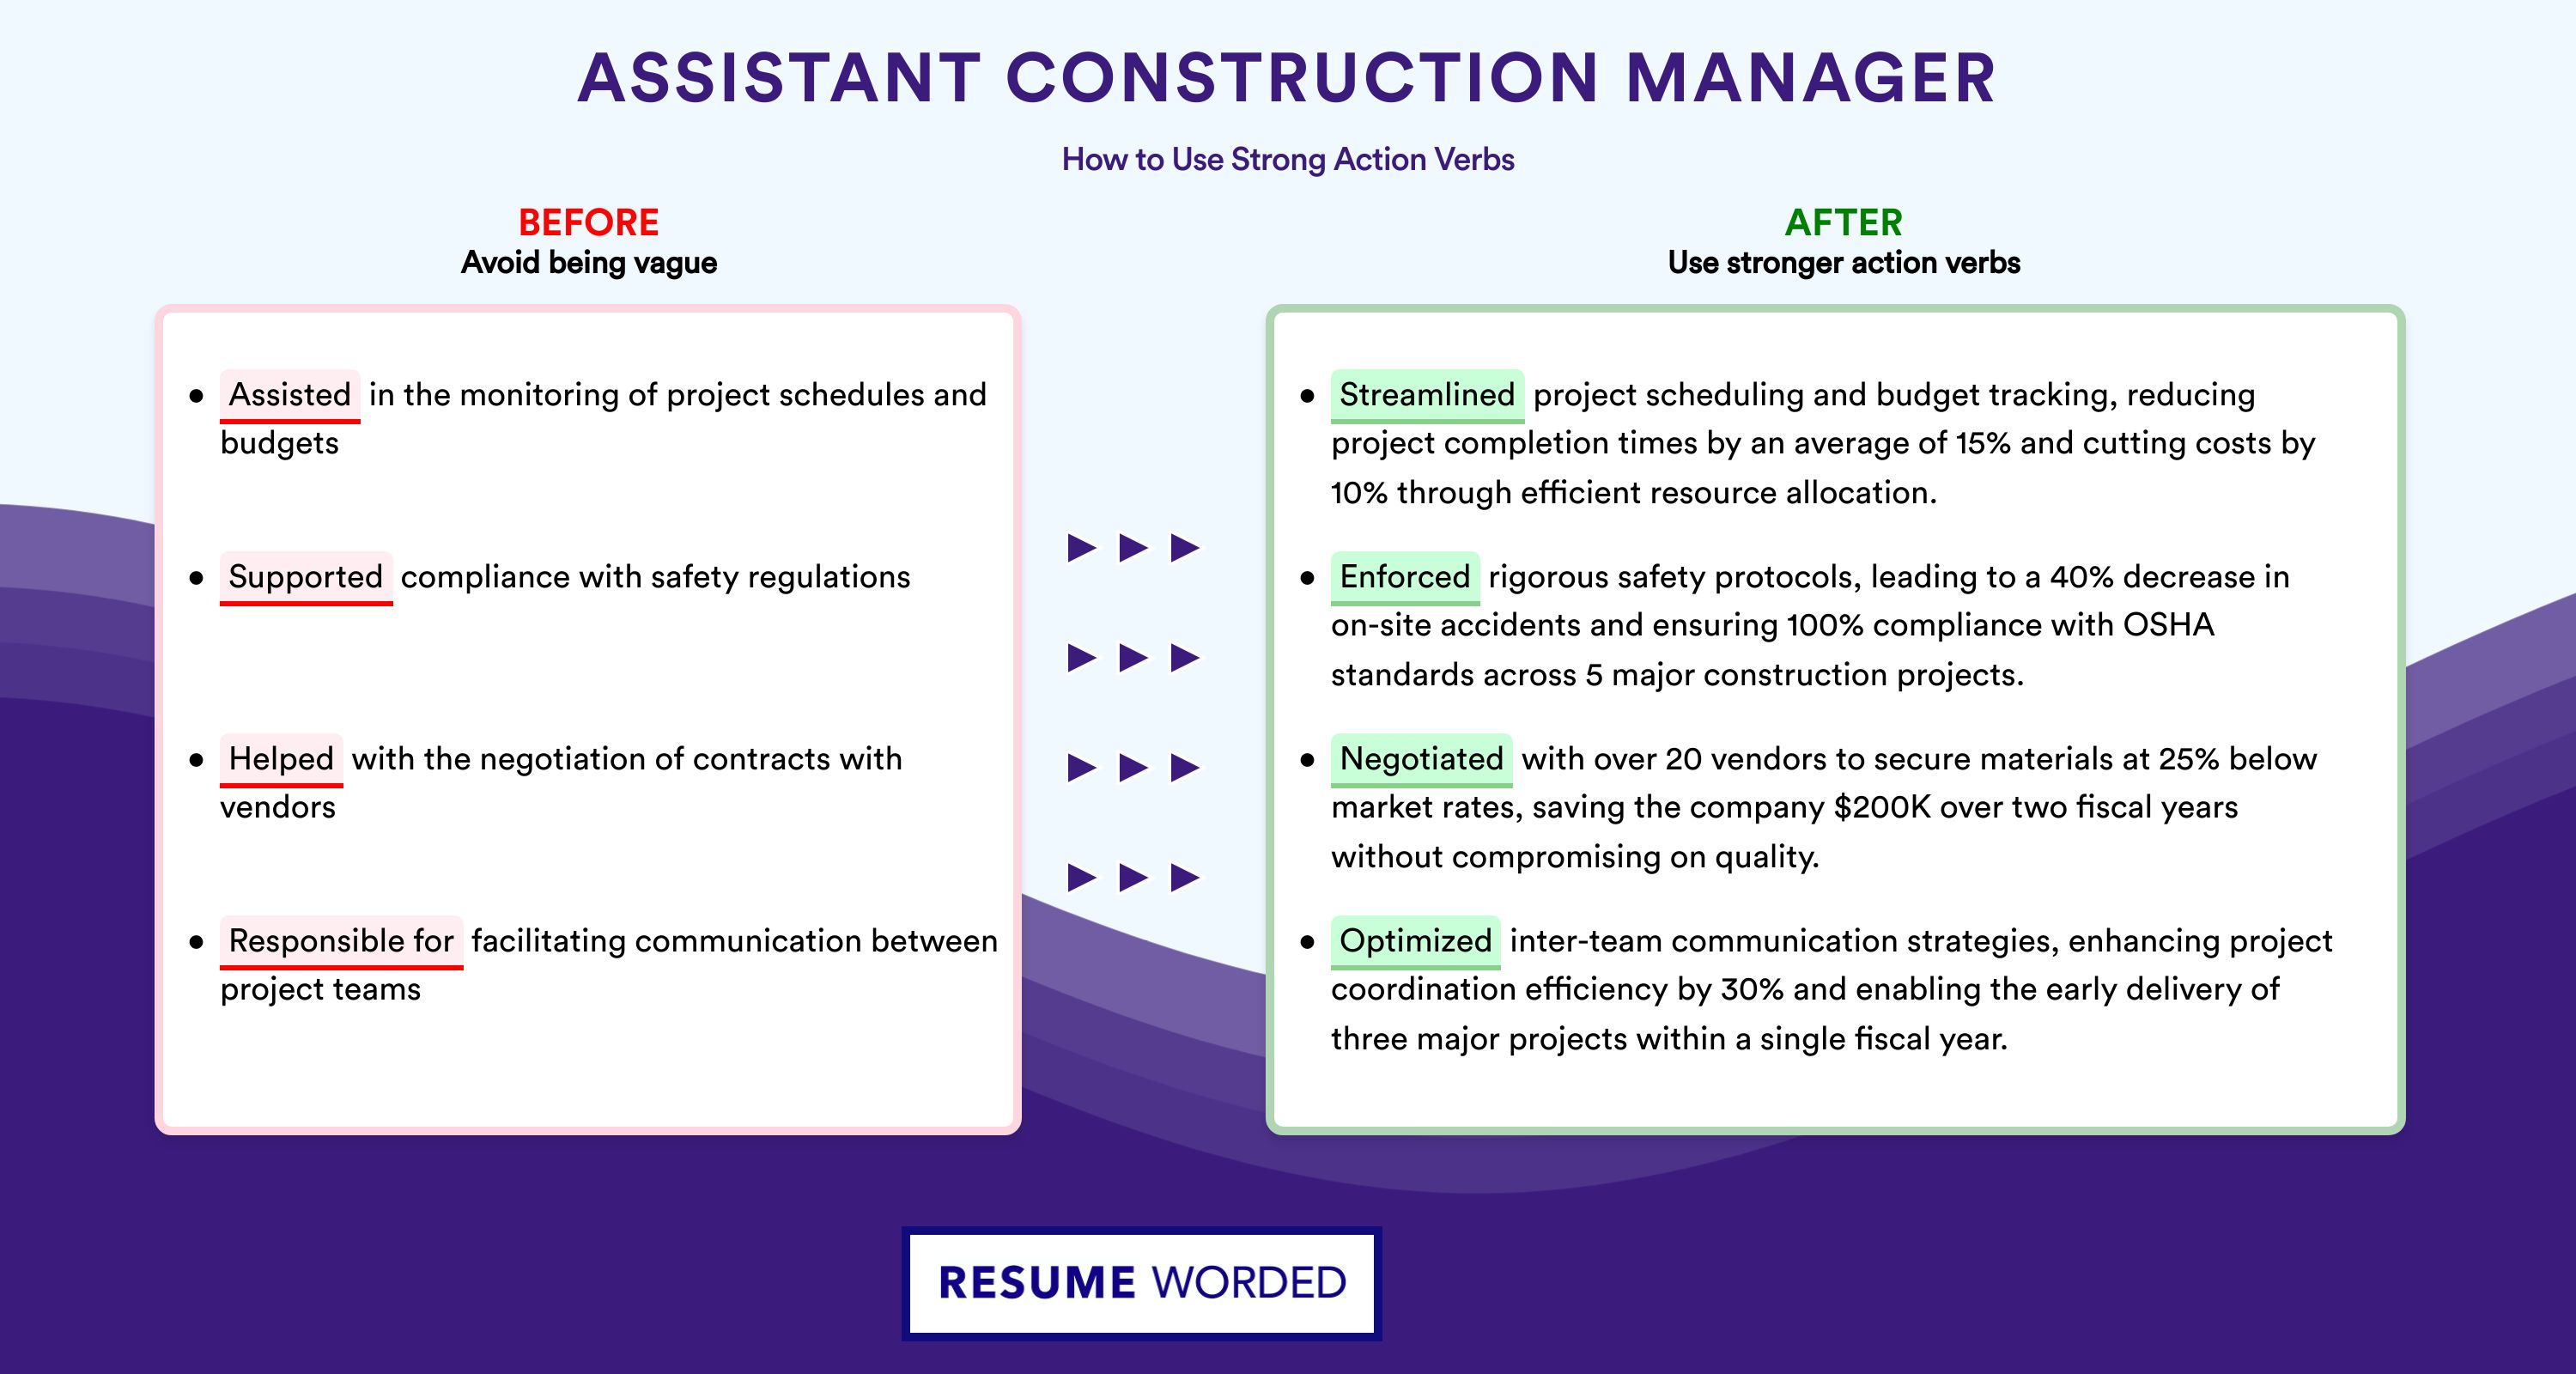 Action Verbs for Assistant Construction Manager